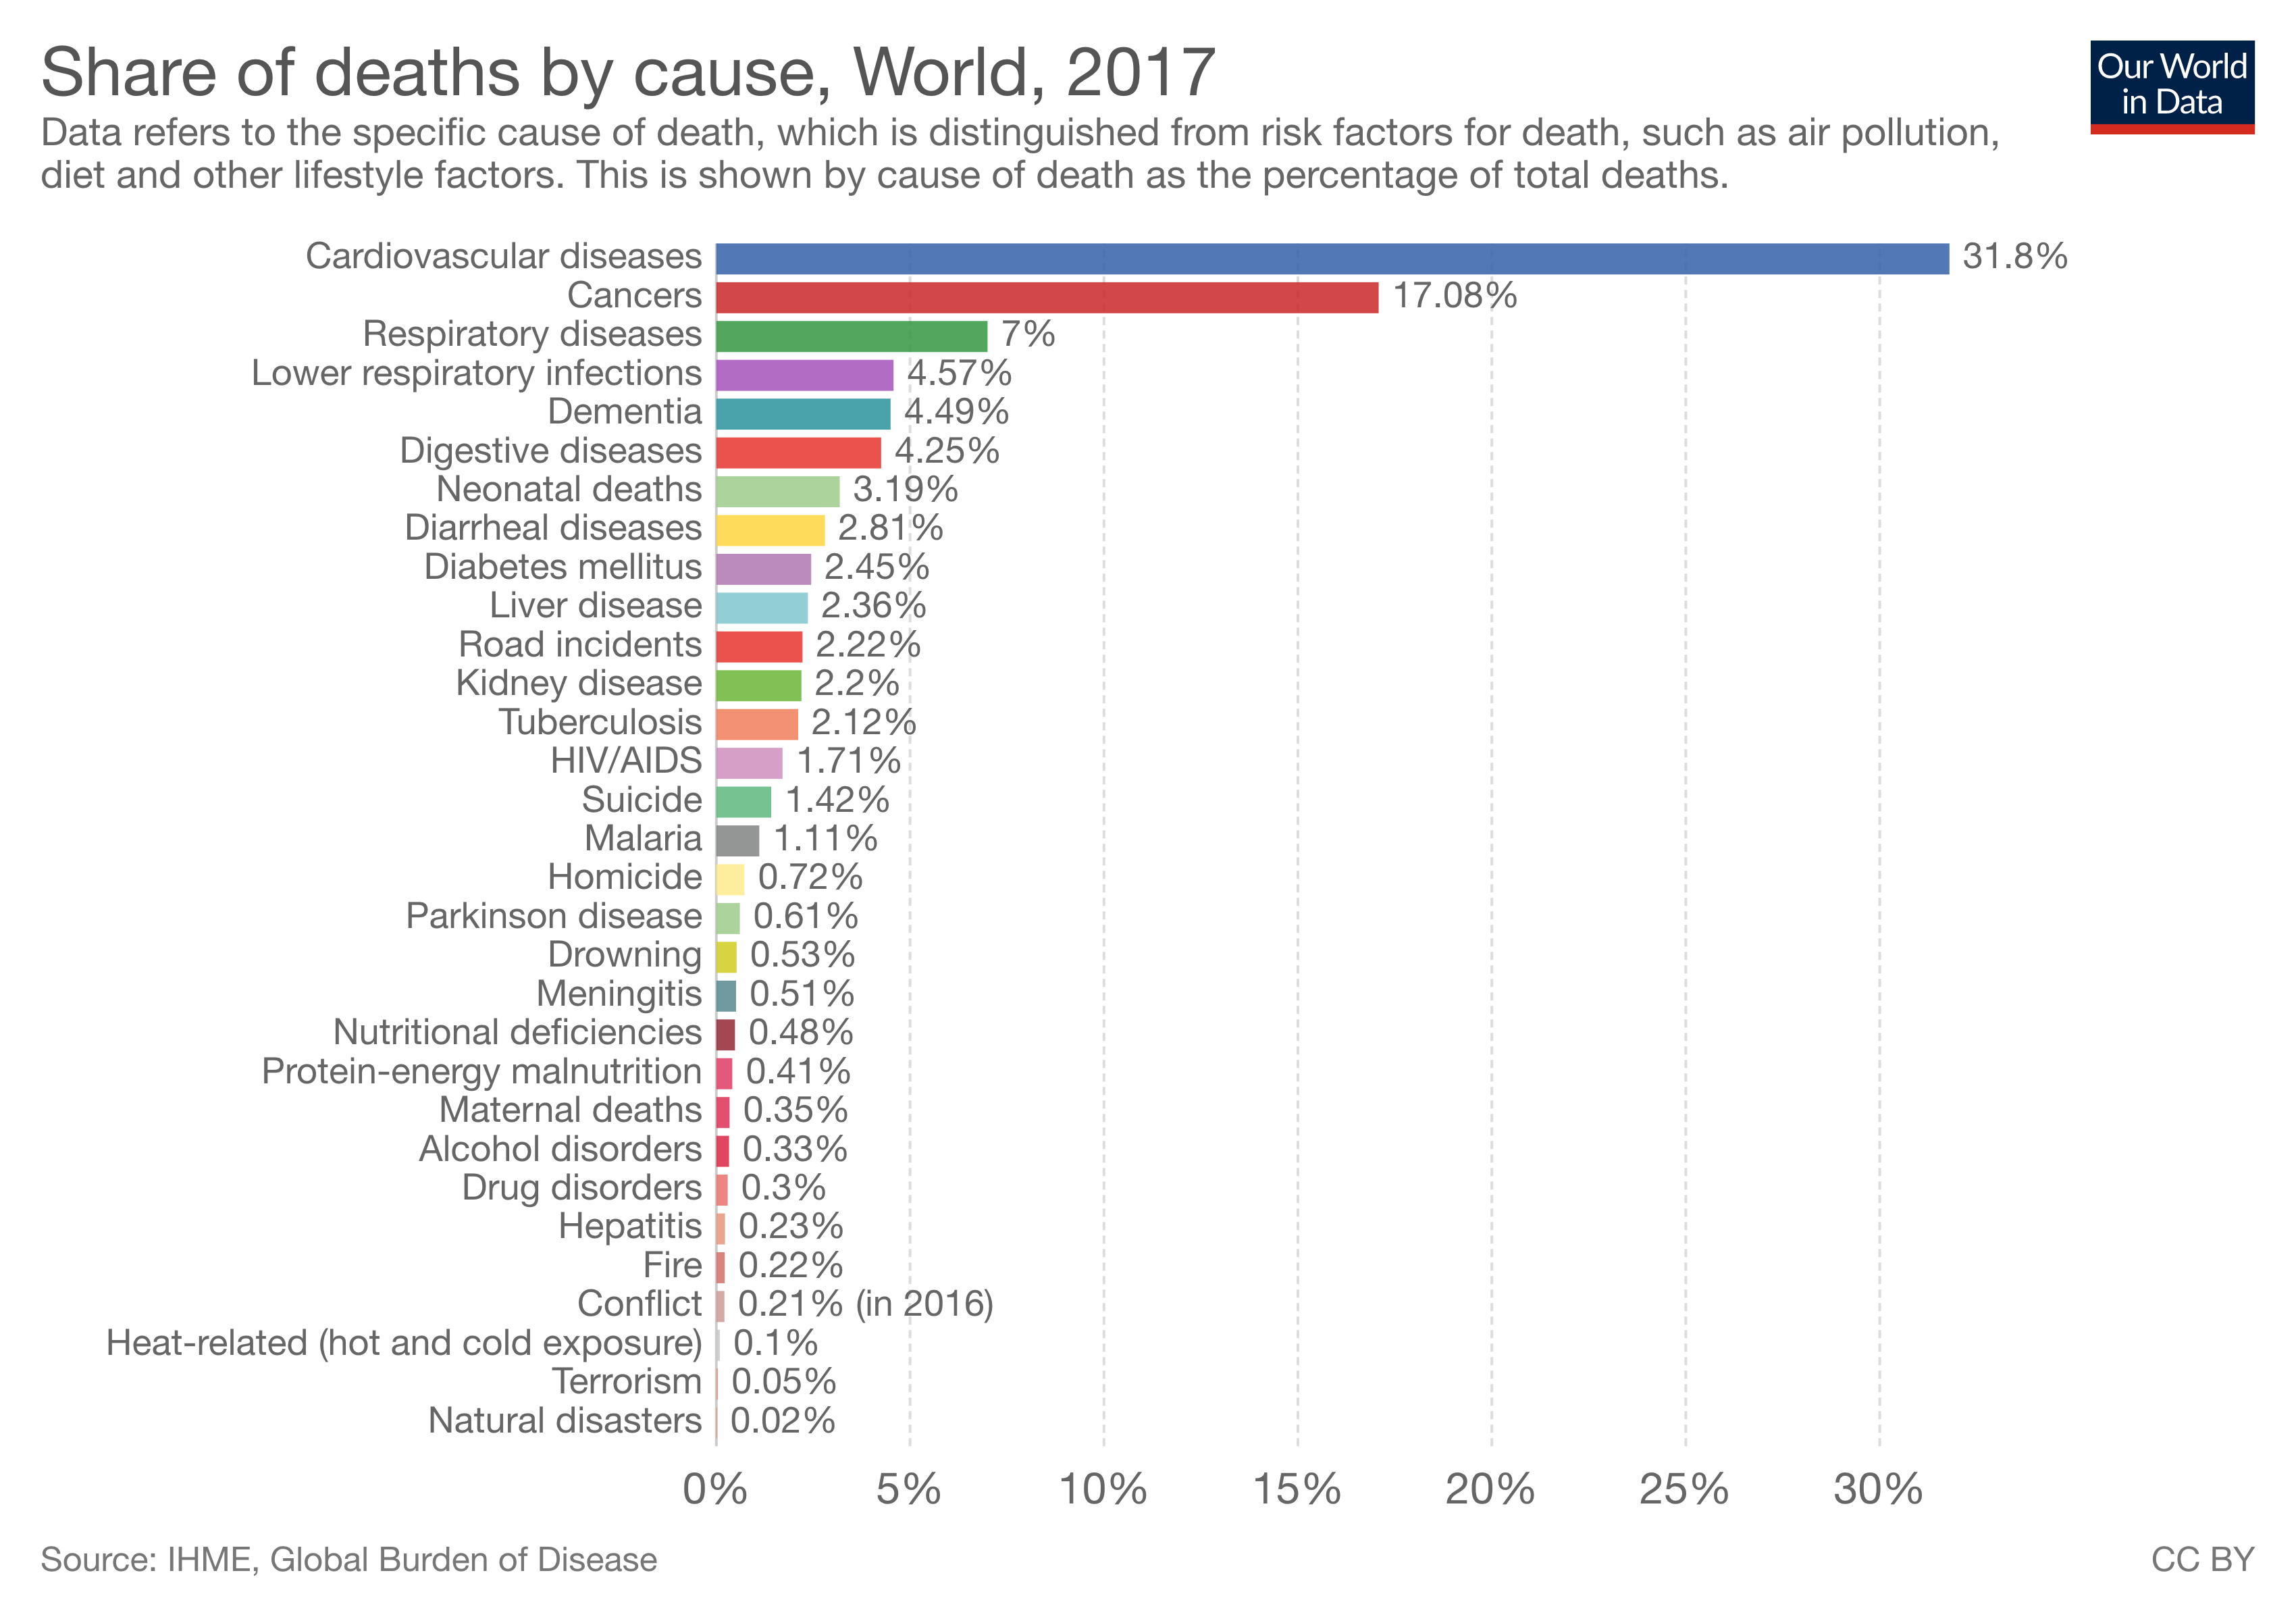 This graph depicts causes of death for the world in 2017. Cardiovascular disease is at the top with 31.8%, followed by cancers at 17.08%, respiratory diseases at 7%, and several others until natural disasters at only 0.02%.